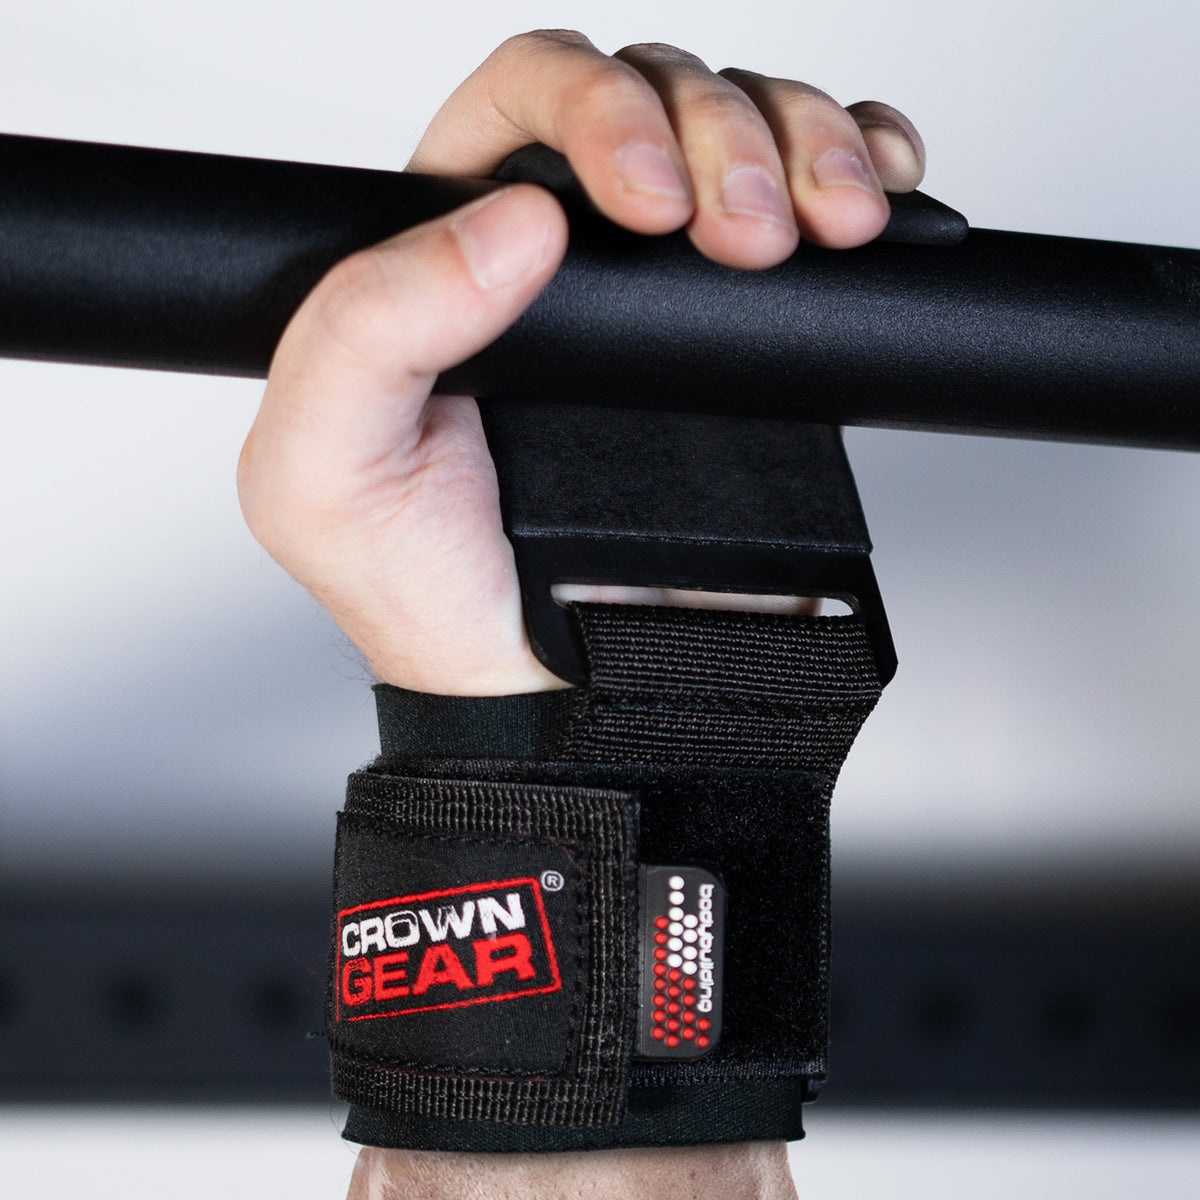 Weightlifting wrist support wraps – Crown Gear